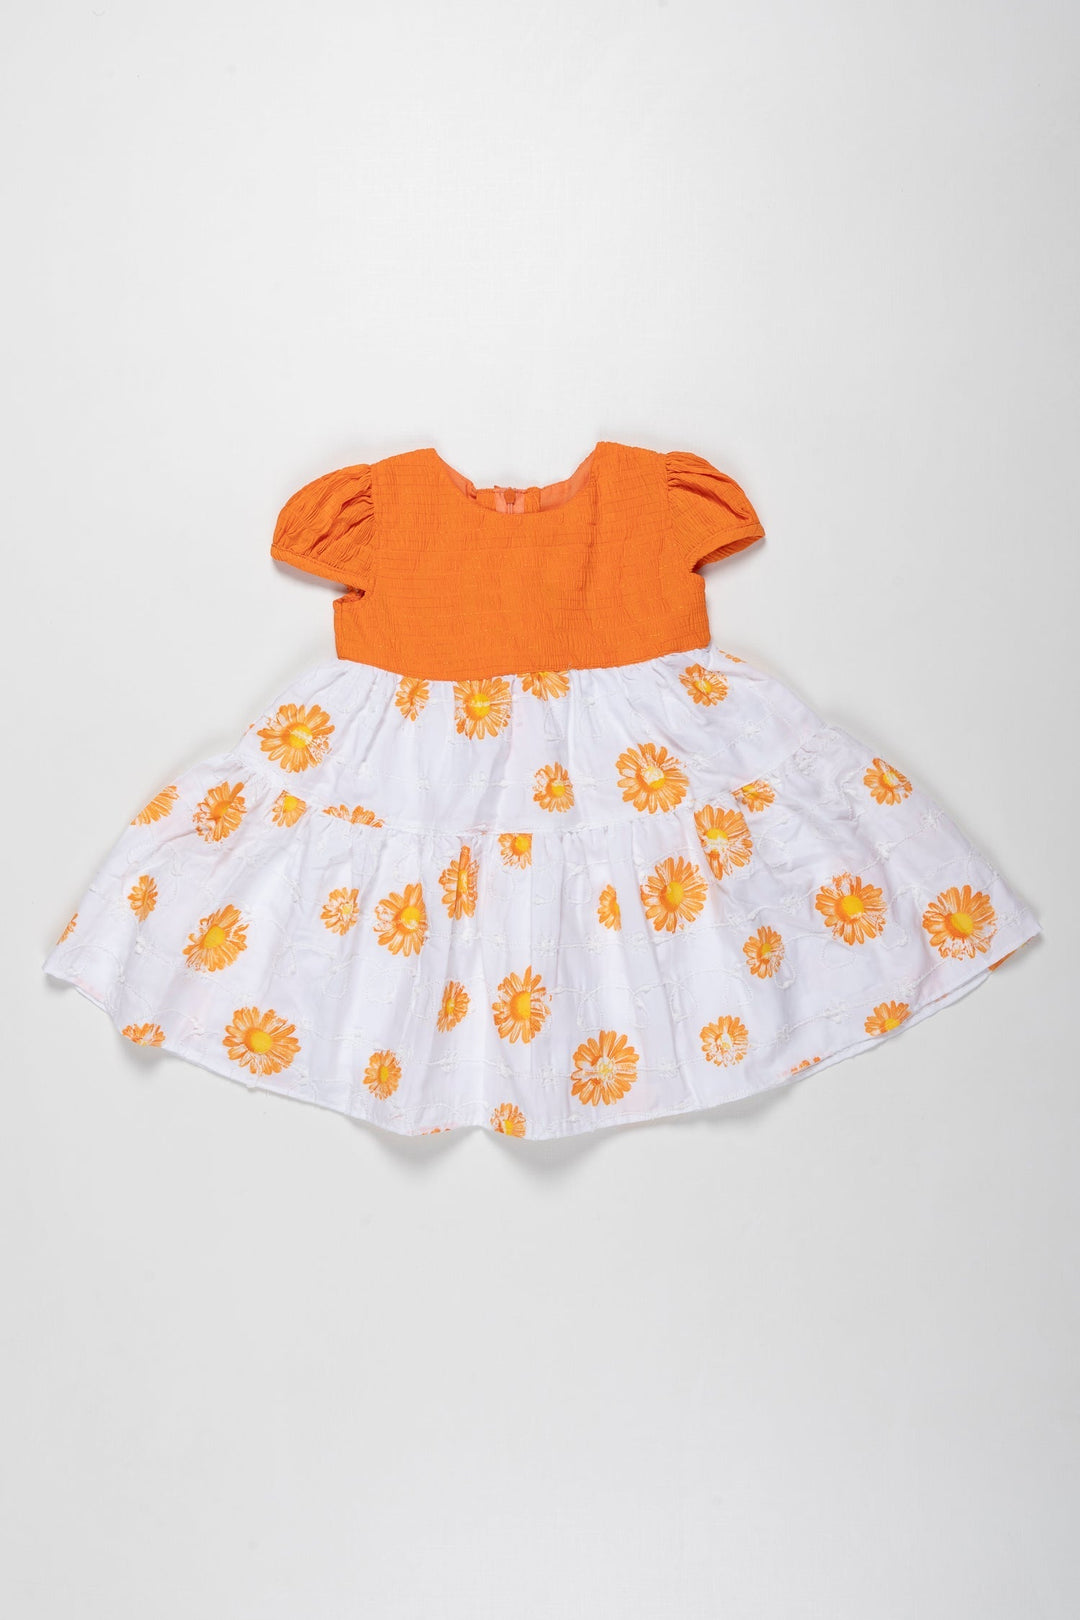 The Nesavu Girls Cotton Frock Sunkissed Delight Orange Cotton Frock with Floral Print for Girls Nesavu 20 (3Y) / Orange / Cotton GFC1273B-20 Girls Orange Floral Pure Cotton Summer Frock | Comfortable & Stylish | The Nesavu